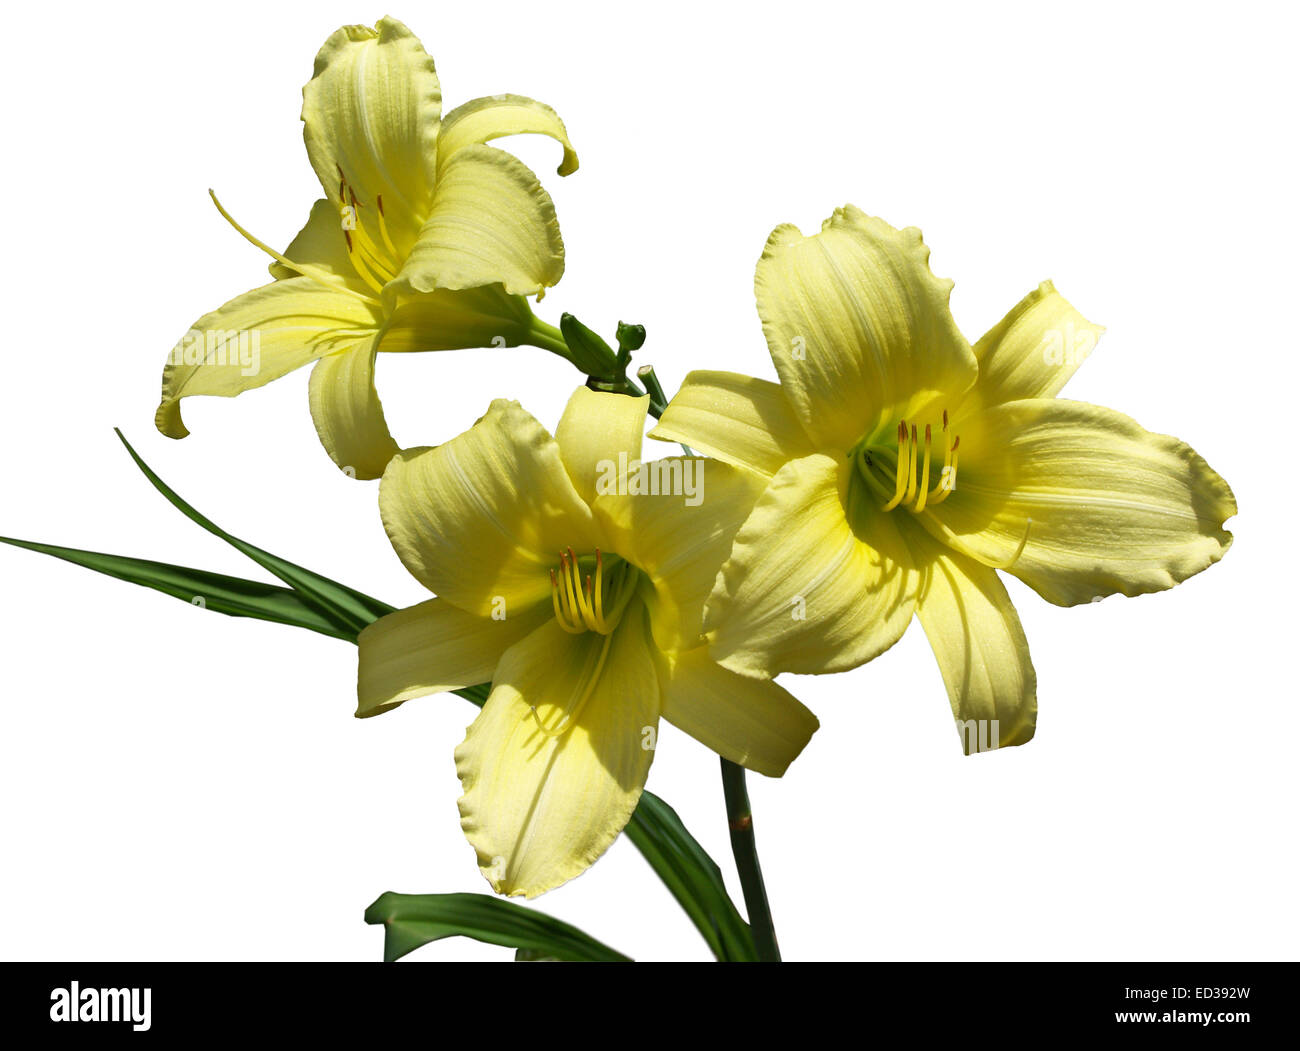 Group of three beautiful pale yellow daylily flowers, 'Yellowstone'  hybrid,  with dark green leaves against white background Stock Photo